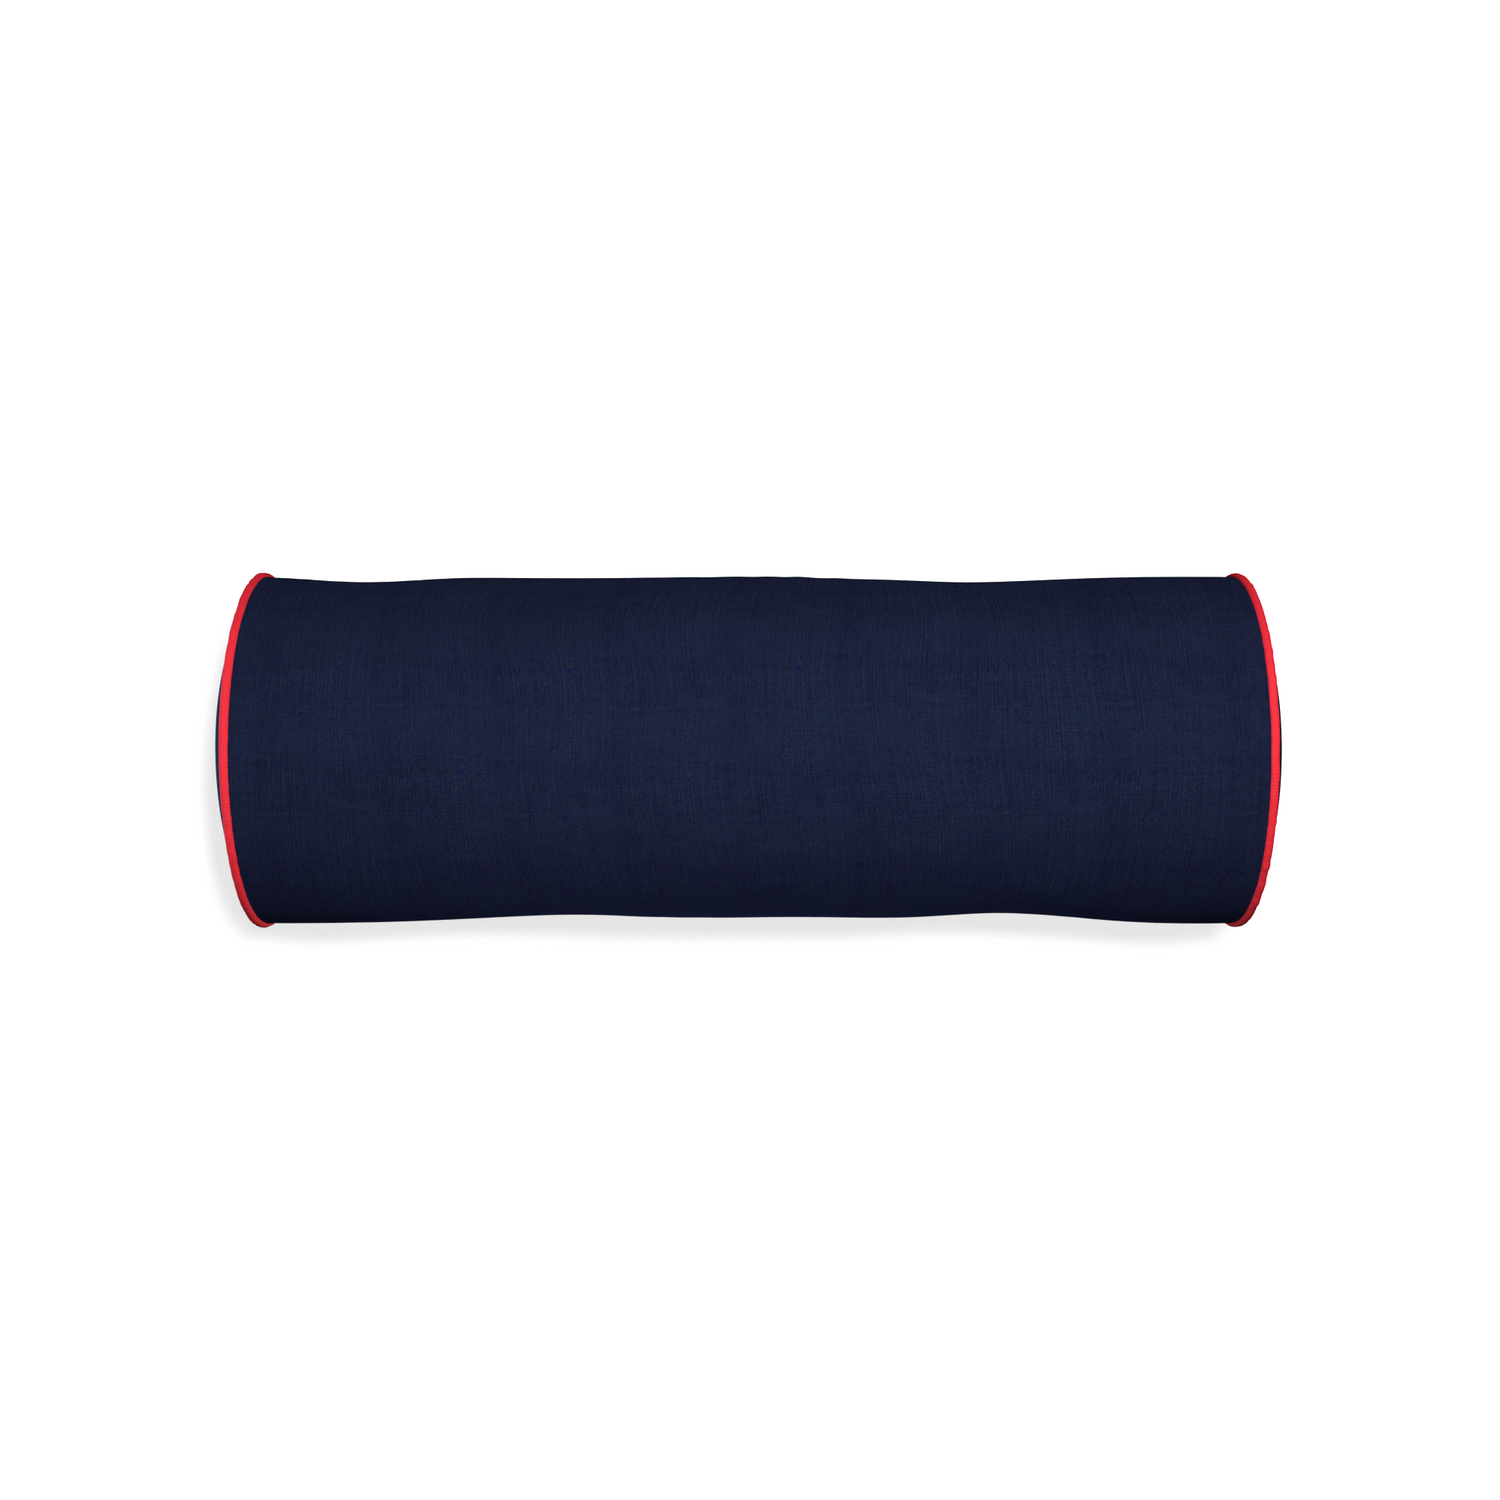 Bolster midnight custom navy bluepillow with cherry piping on white background